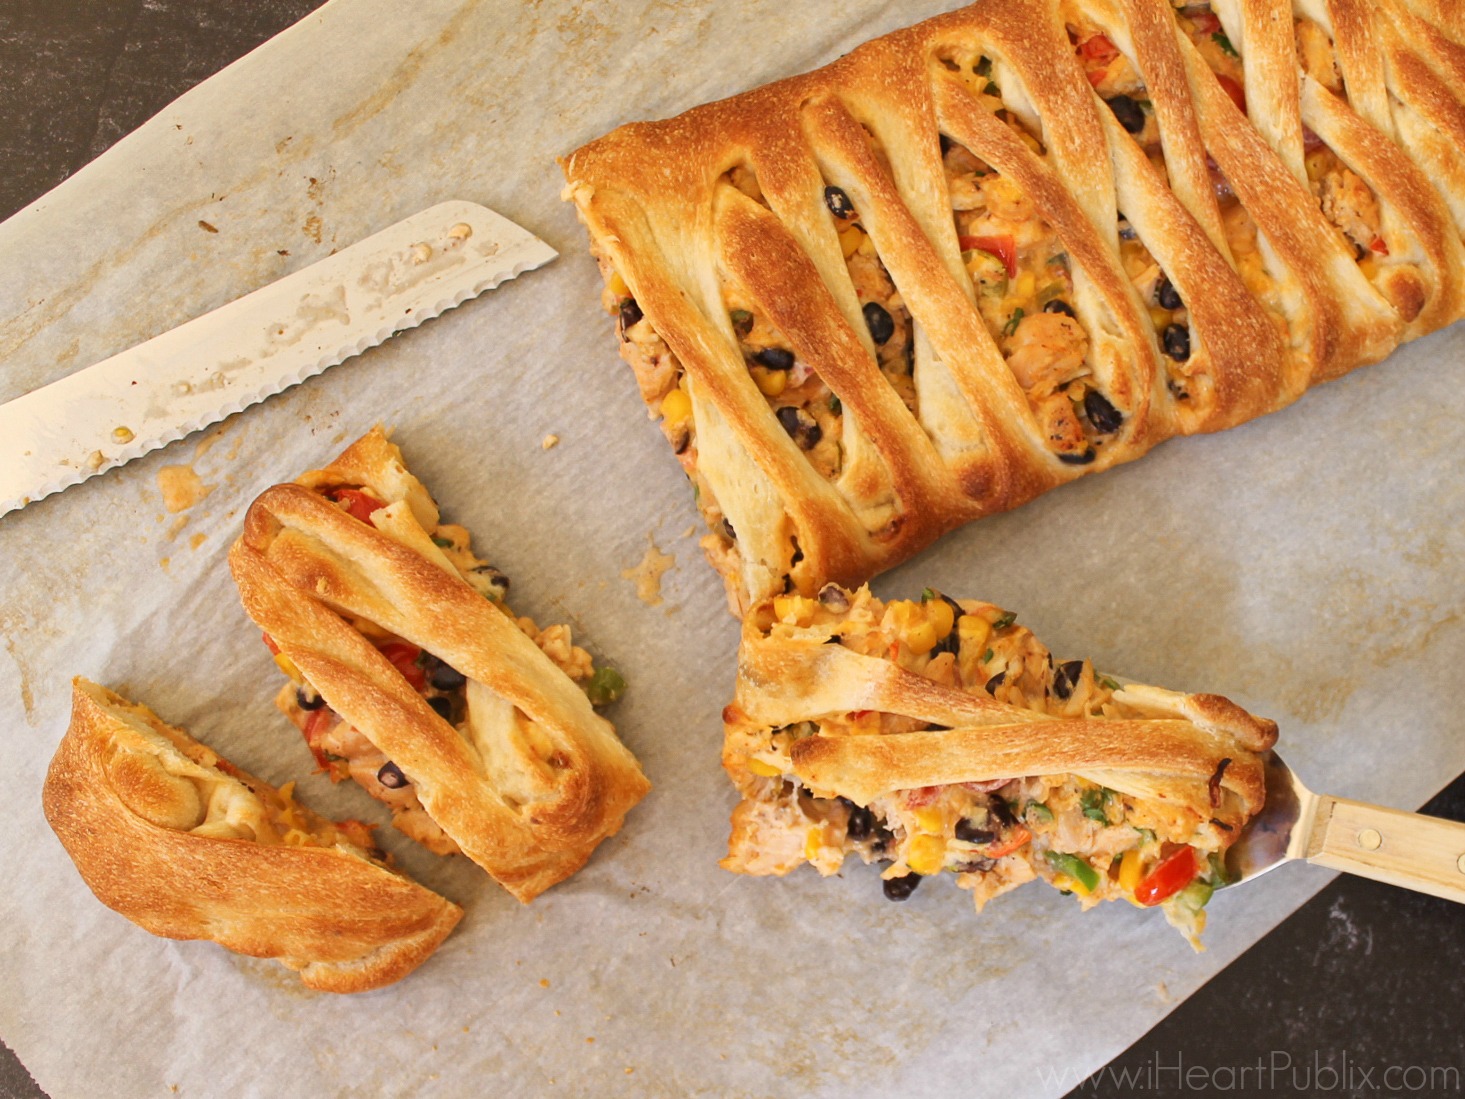 Southwestern Cheesy Chicken Braid Made With Curly’s Pulled Chicken – Save With The New Coupon